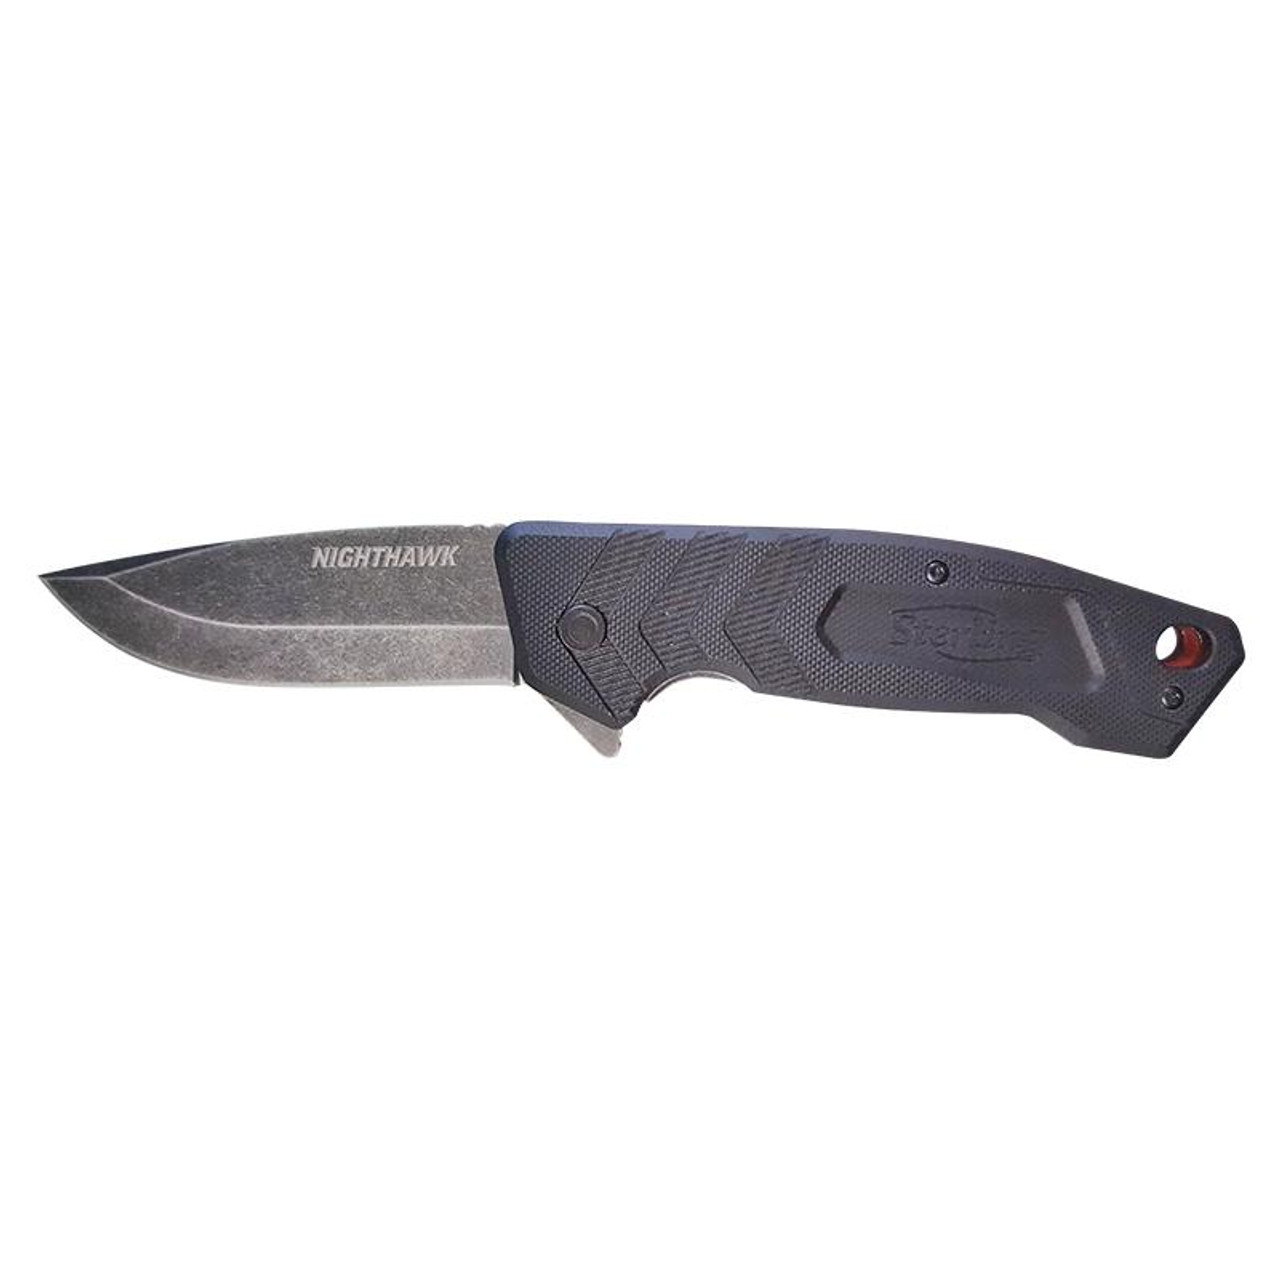 Sterling Nighthawk 88Mm, 3.5In Smooth Blade Pocket Knife Carded